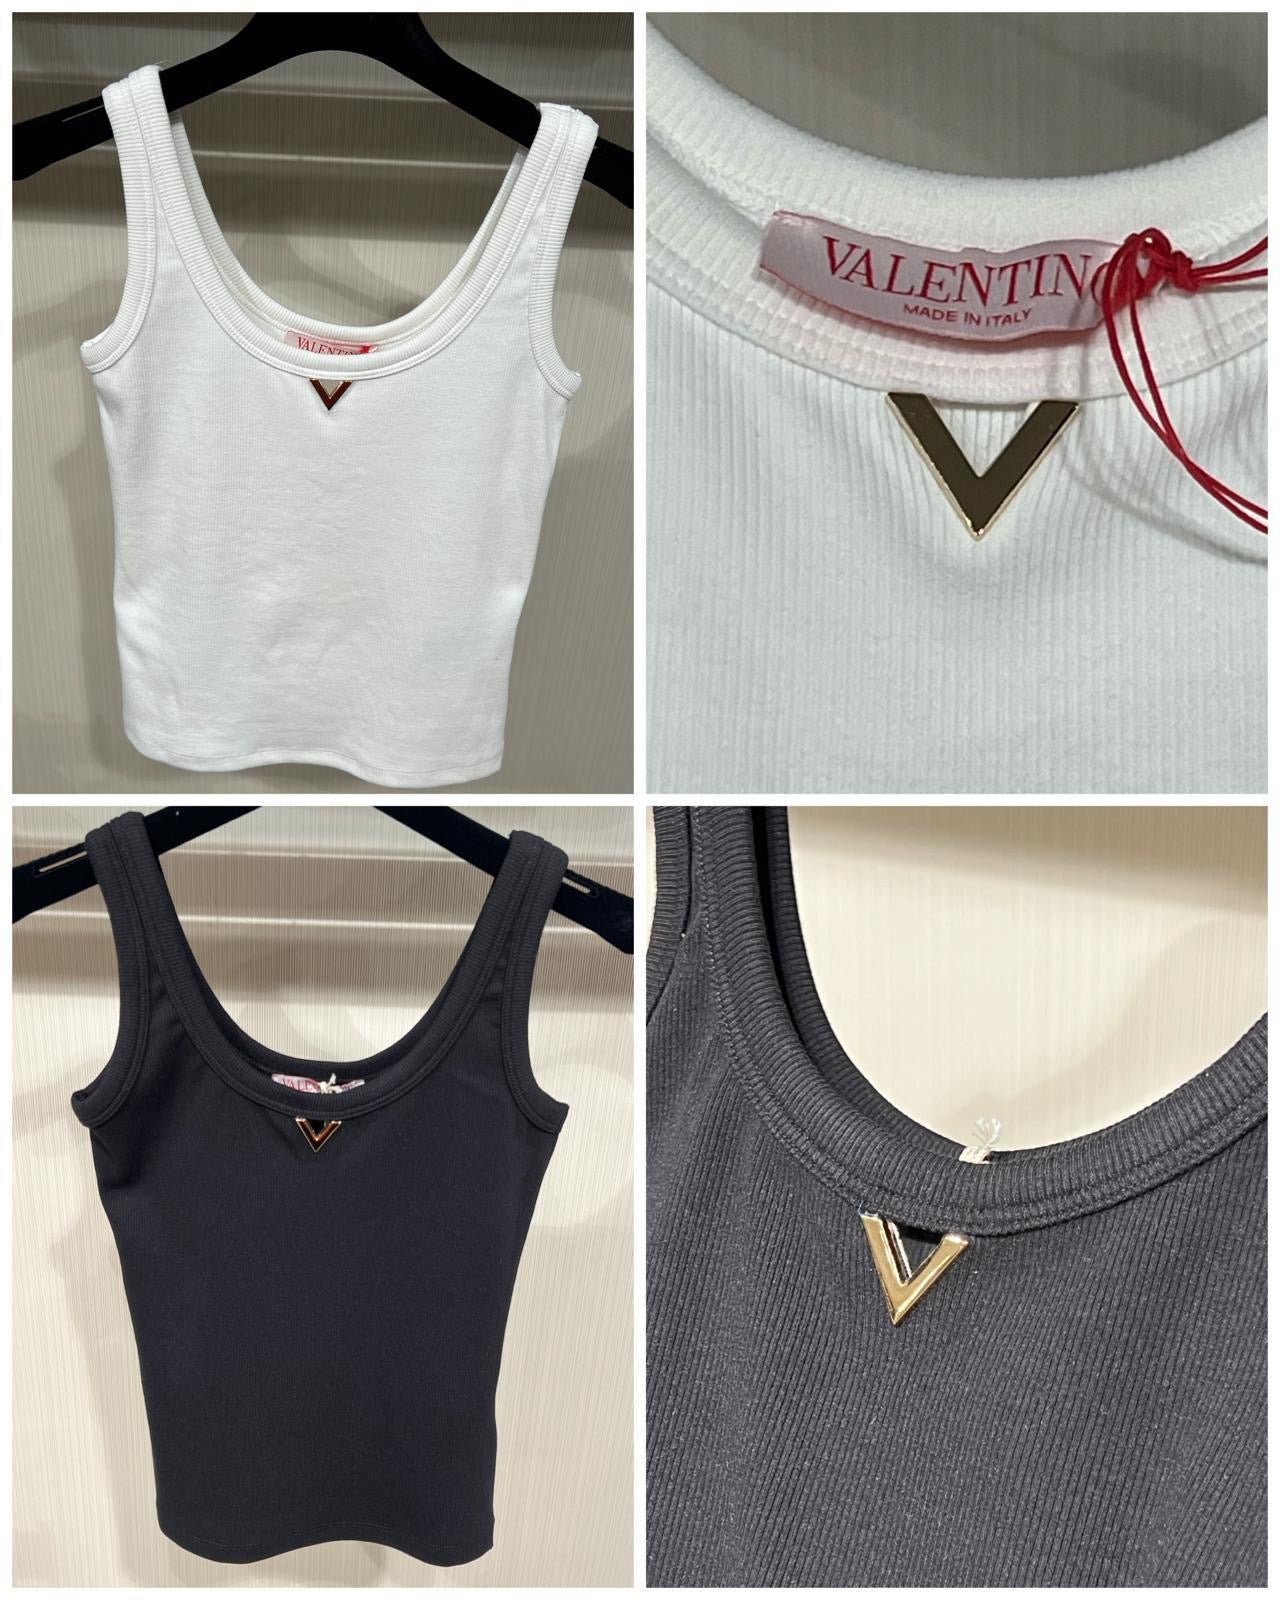 Valentino Tank Top For Women